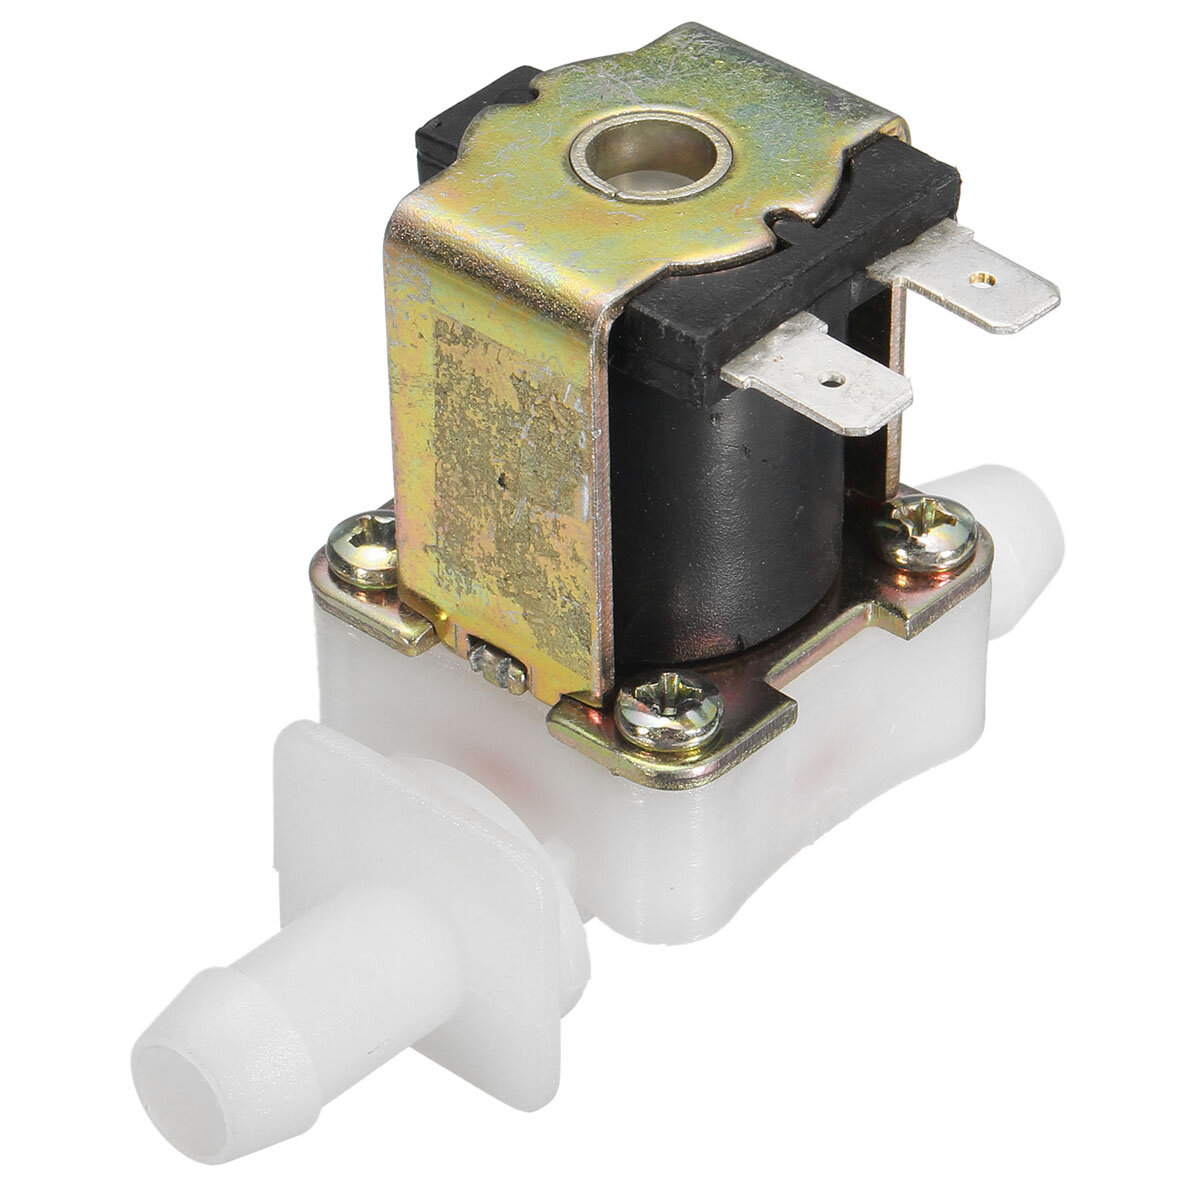 1/2" DC 12V Electric Solenoid Valve Normally Closed N/C Water Inlet Flow Switch